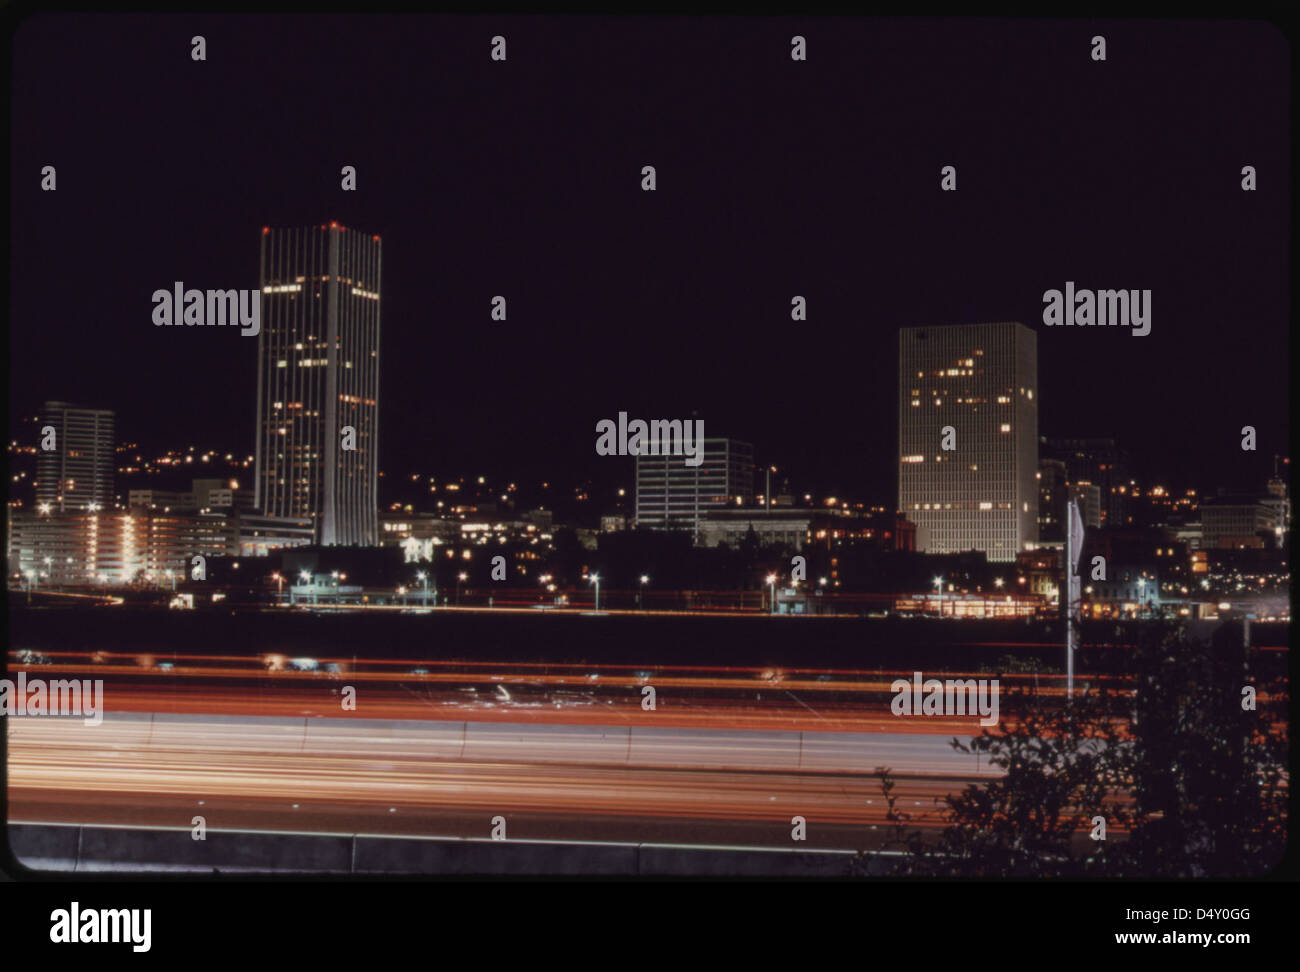 Downtown Core Area of Portland, after 7 P.M. on November 2 1973, During the State's Energy Crisis with Few Commercial and Neon Lighting Displays. This Photo Looks Toward the West with the Willamette River in the Foreground 11/1973 Stock Photo